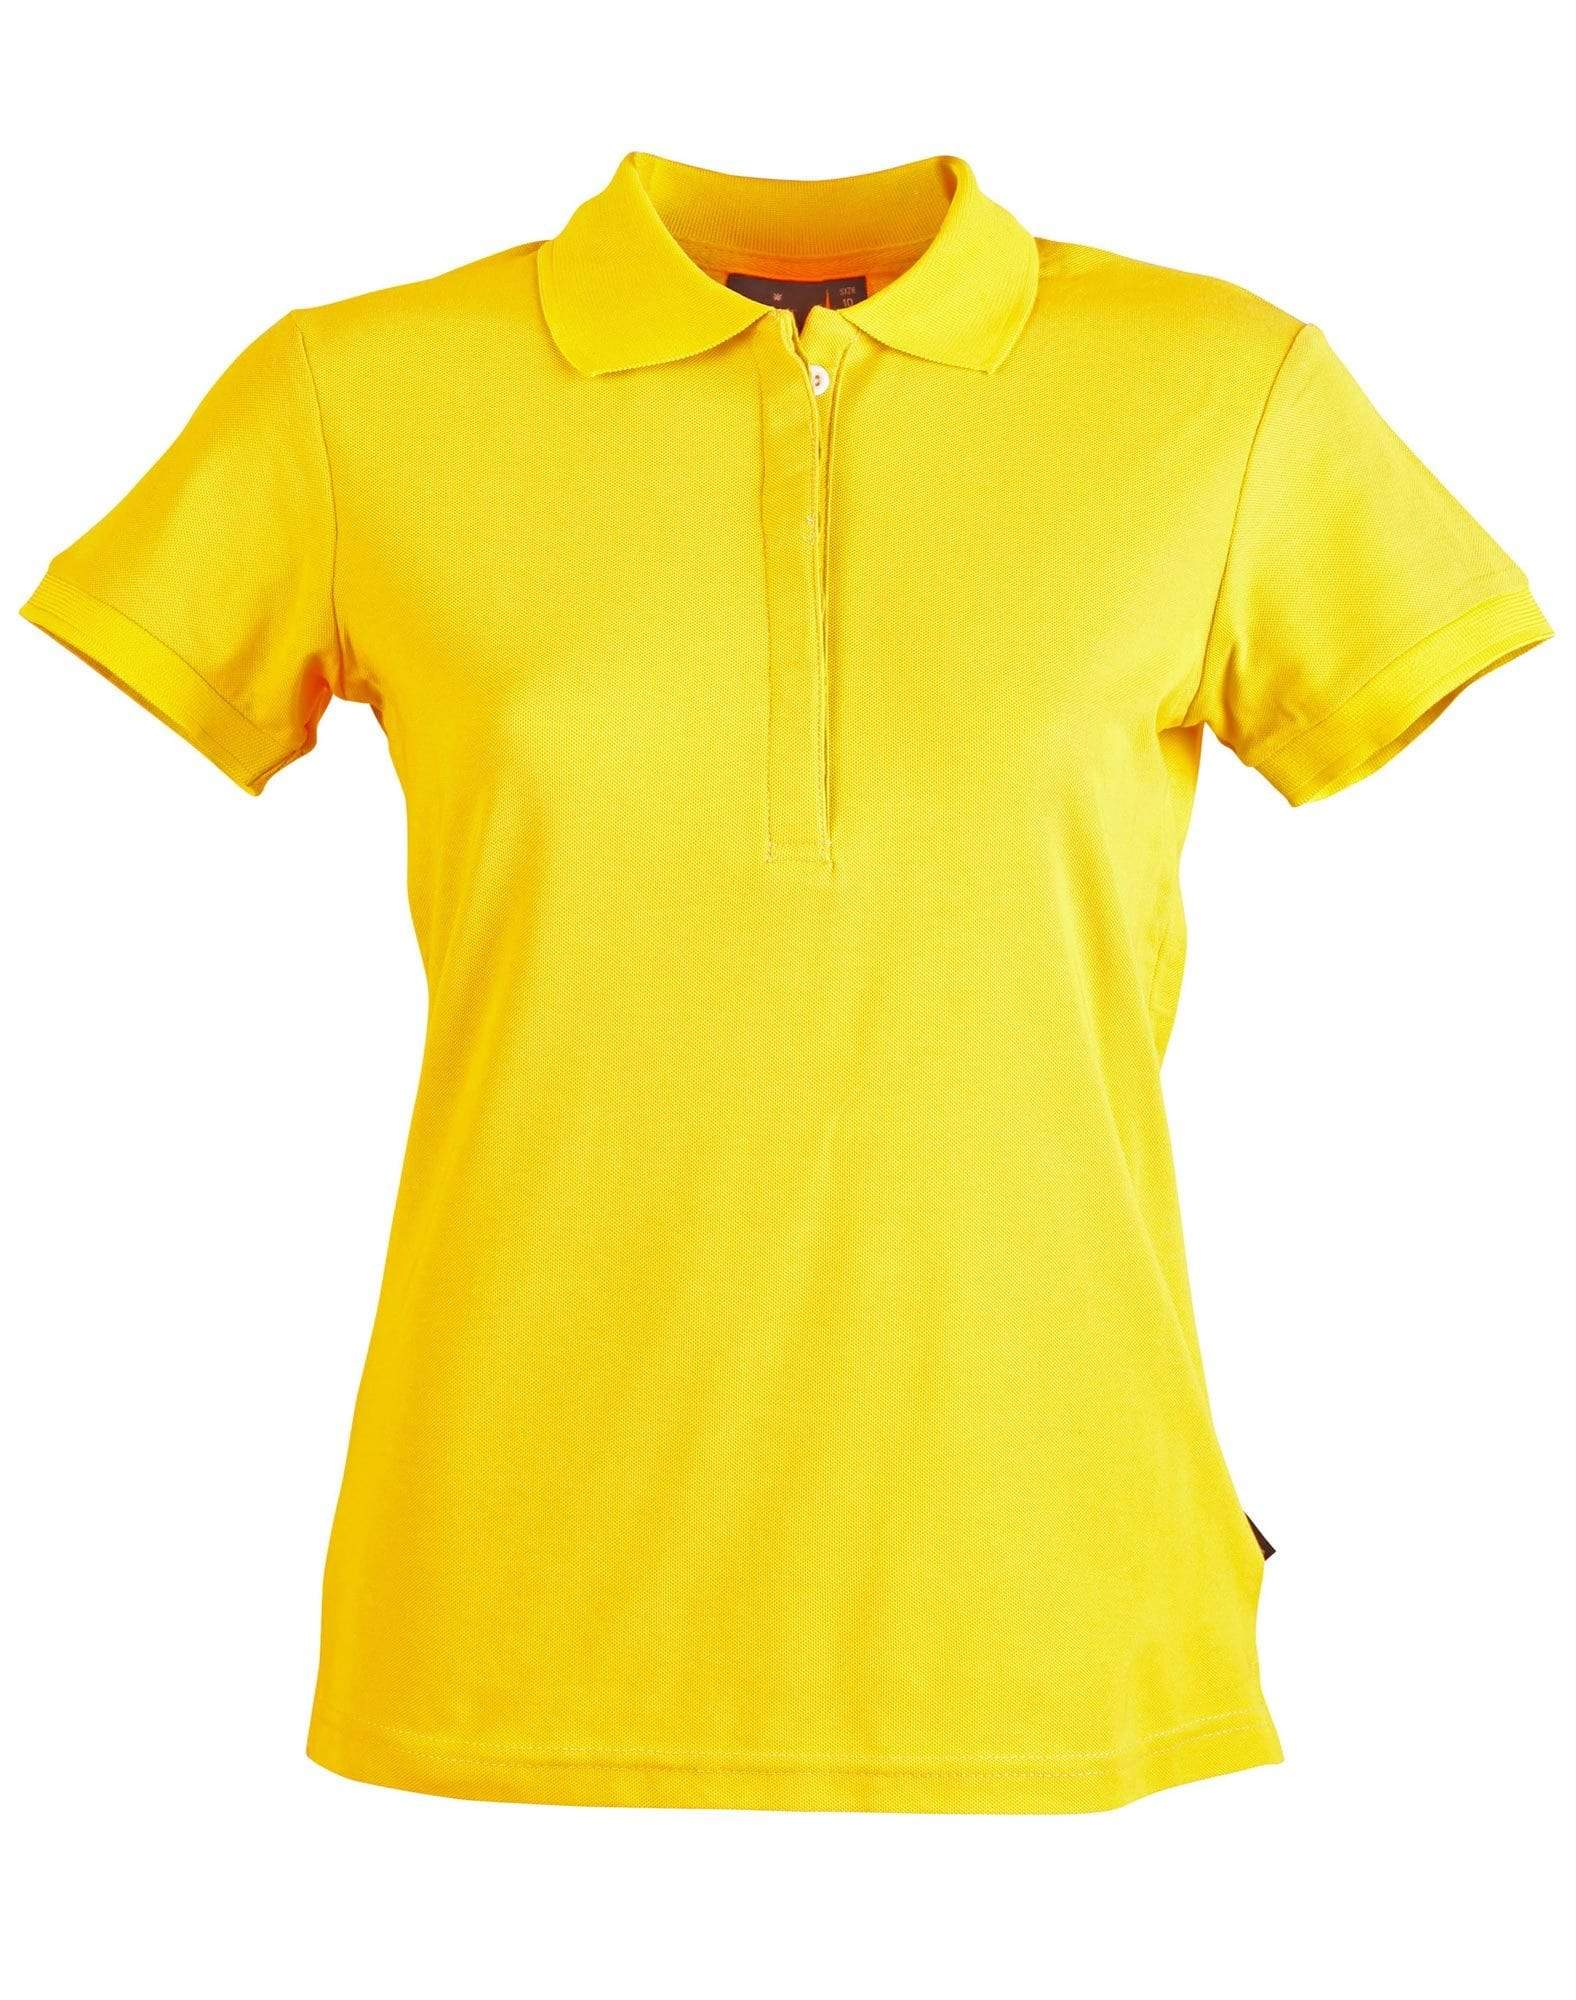 Winning Spirit Casual Wear Gold, Grey / 8 Connection Polo Ladies' Ps64